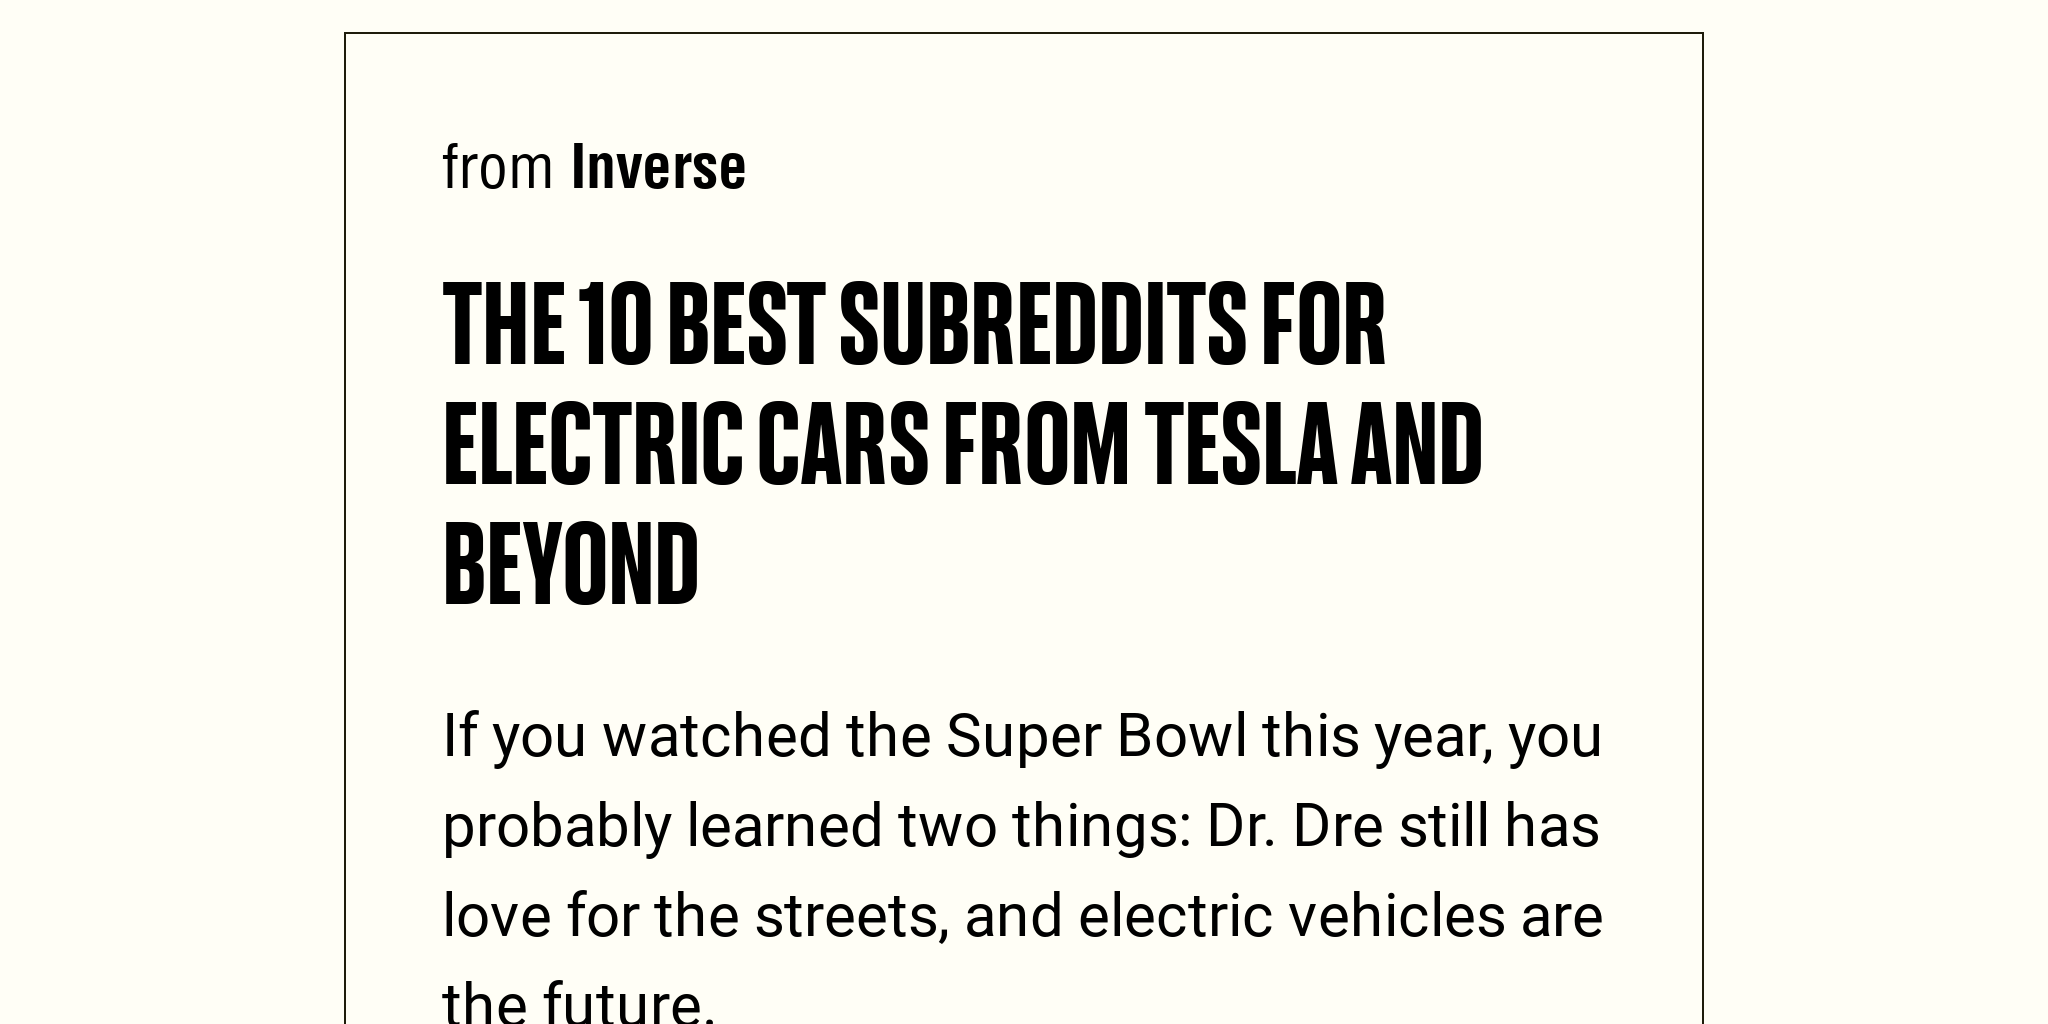 The 10 best subreddits for electric cars from Tesla and beyond Briefly